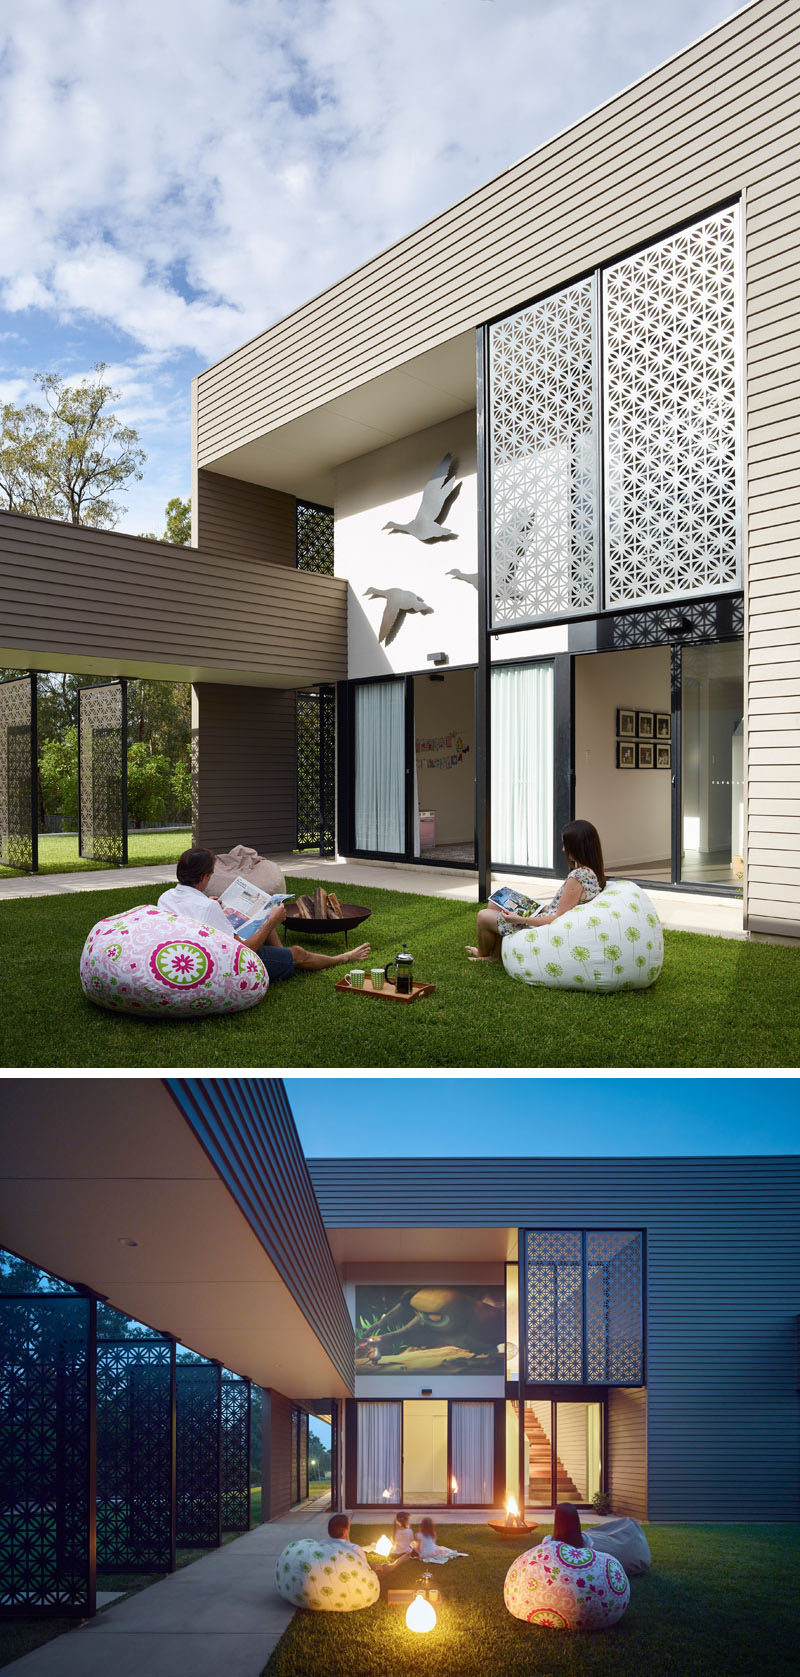 This modern house has a courtyard that offers shade and filtered light, and by night, everyone can gather in the courtyard for bonfires and stargazing. On the wall above, the flying ducks artwork can be removed to allow for a private outdoor movie screening.